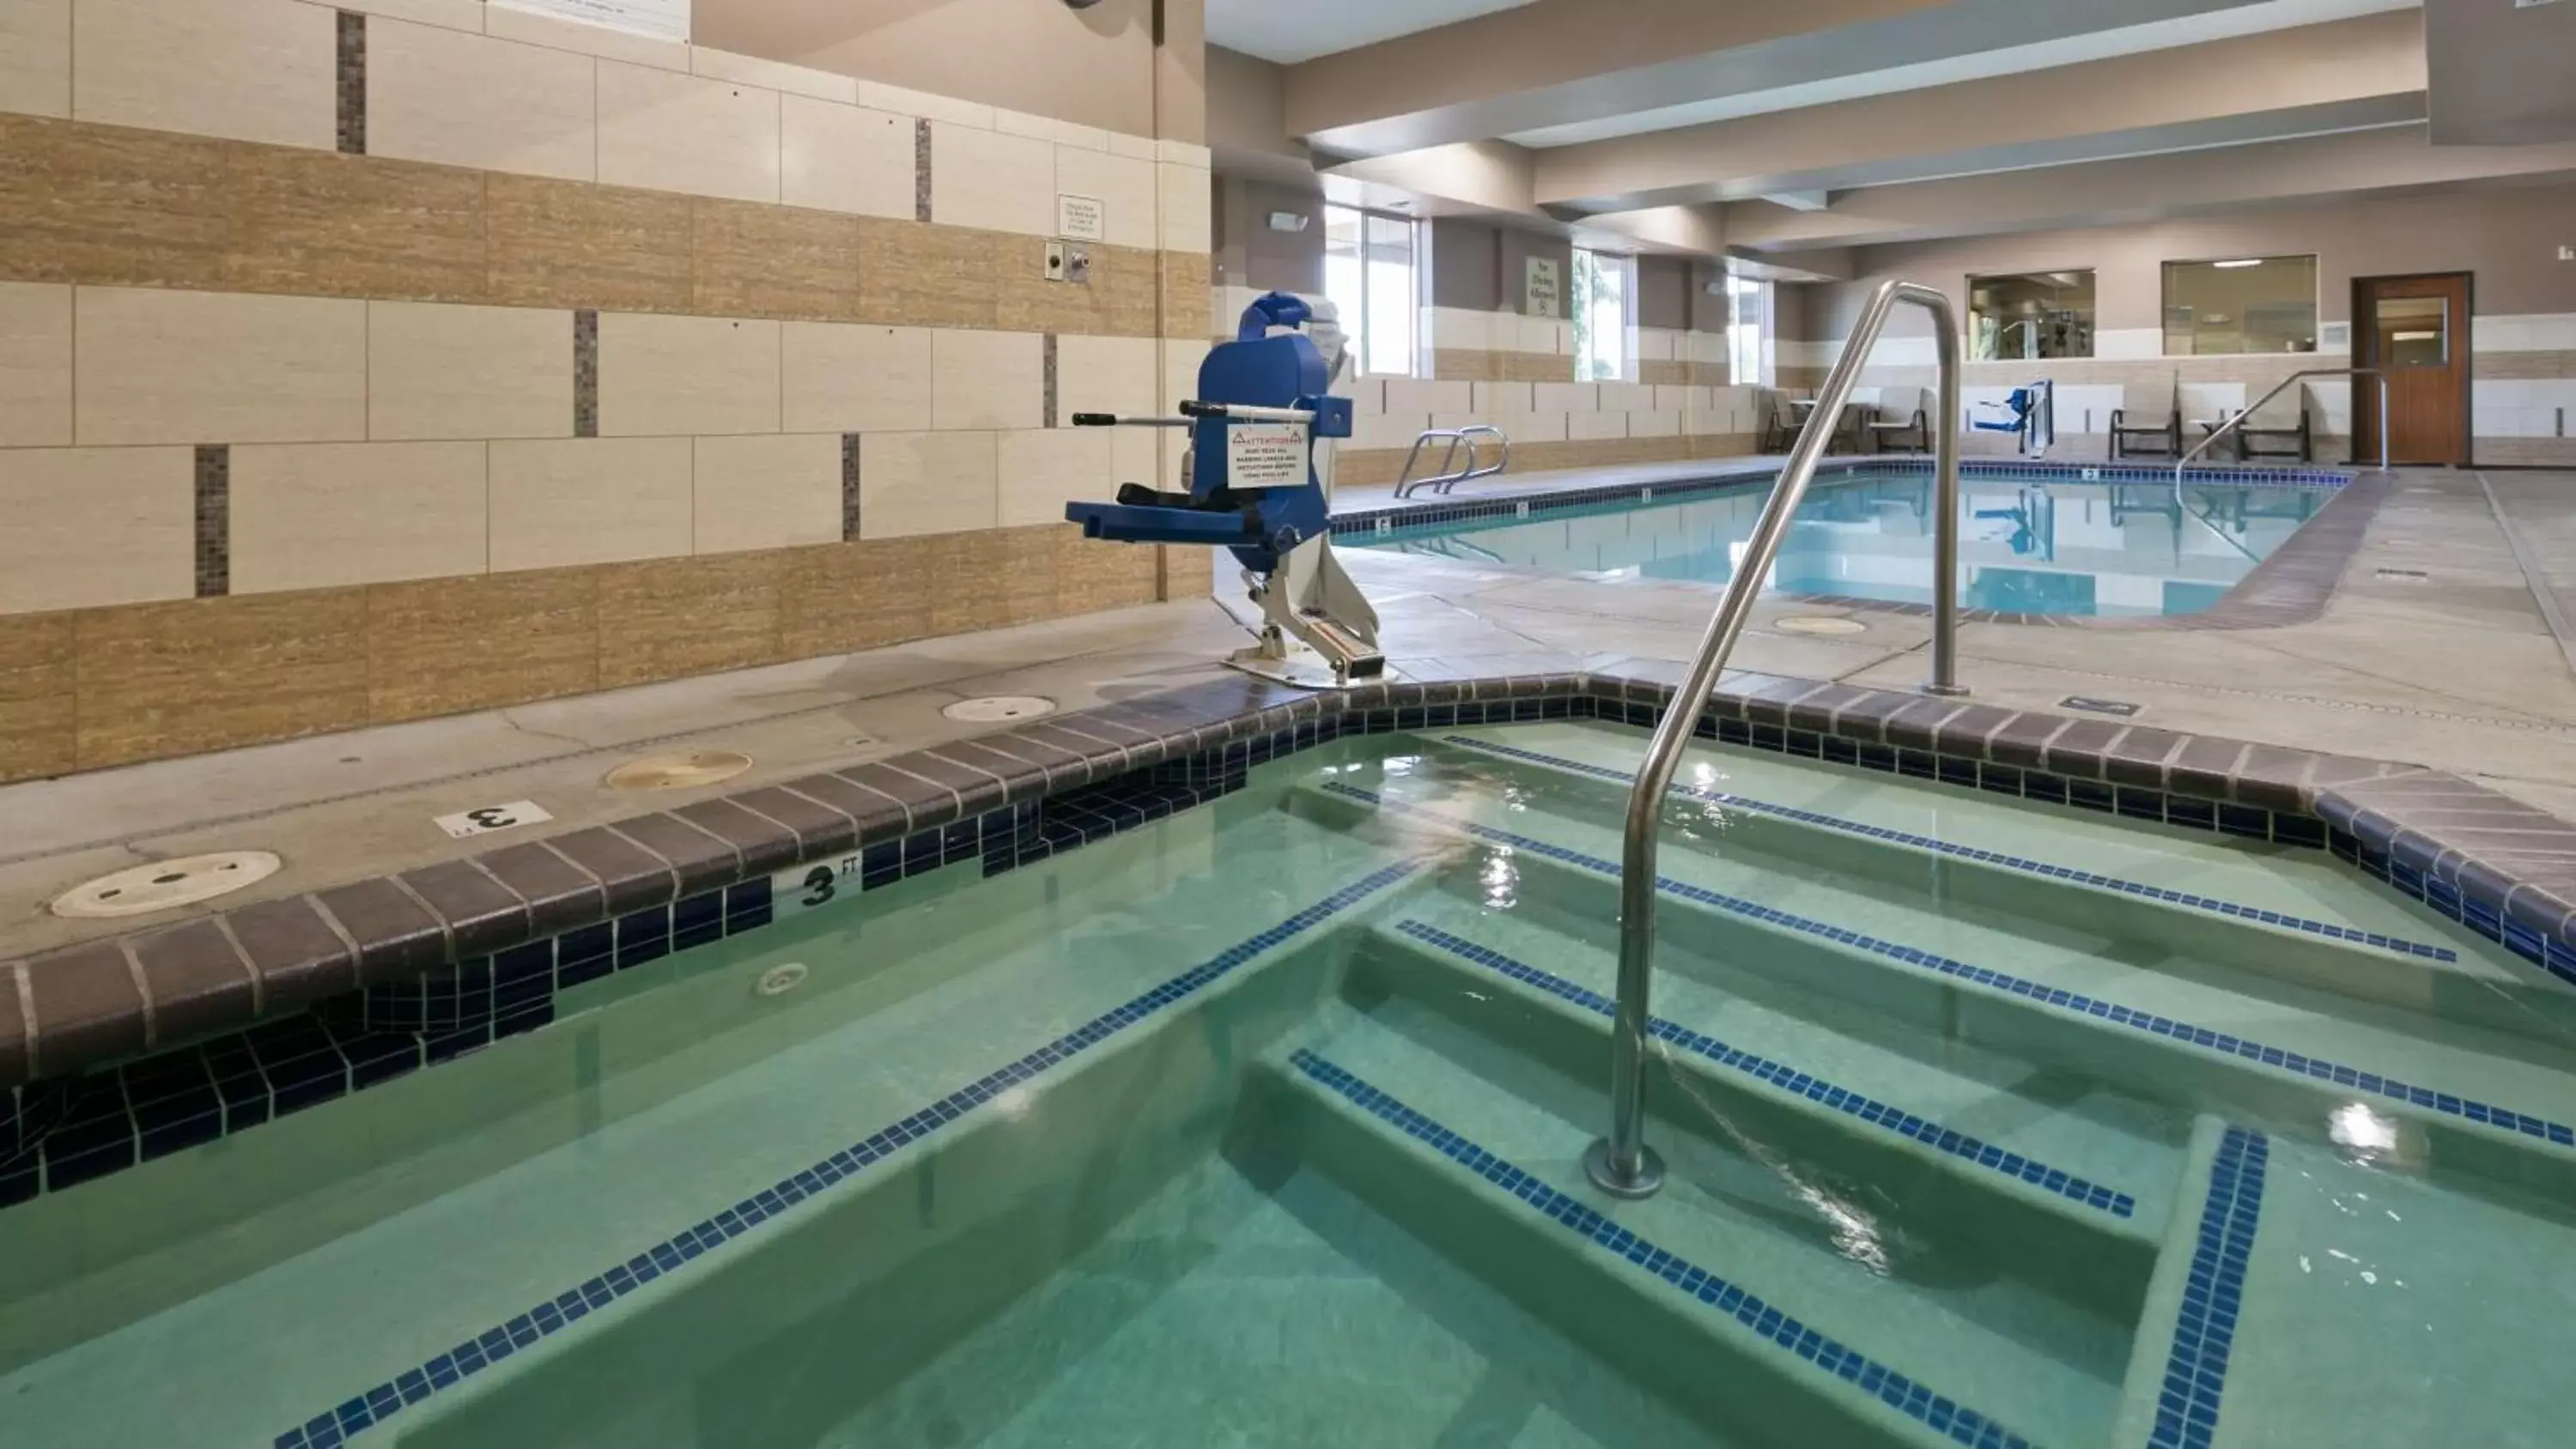 On site, Swimming Pool in Best Western Plus Port of Camas-Washougal Convention Center